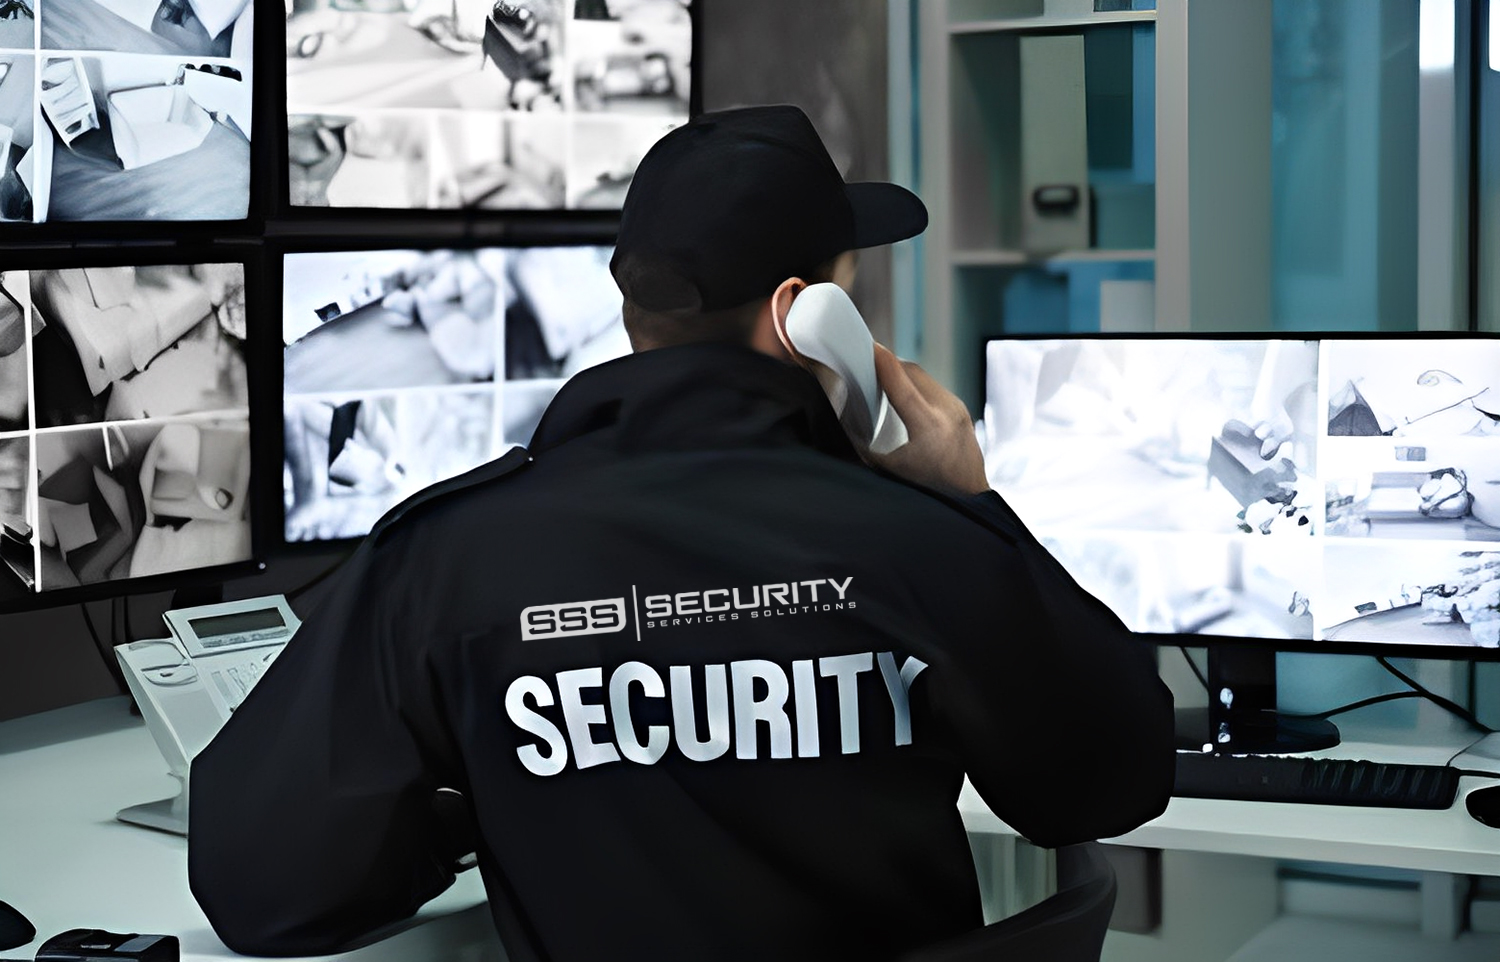 Security Company: Delivering Quality Security Services